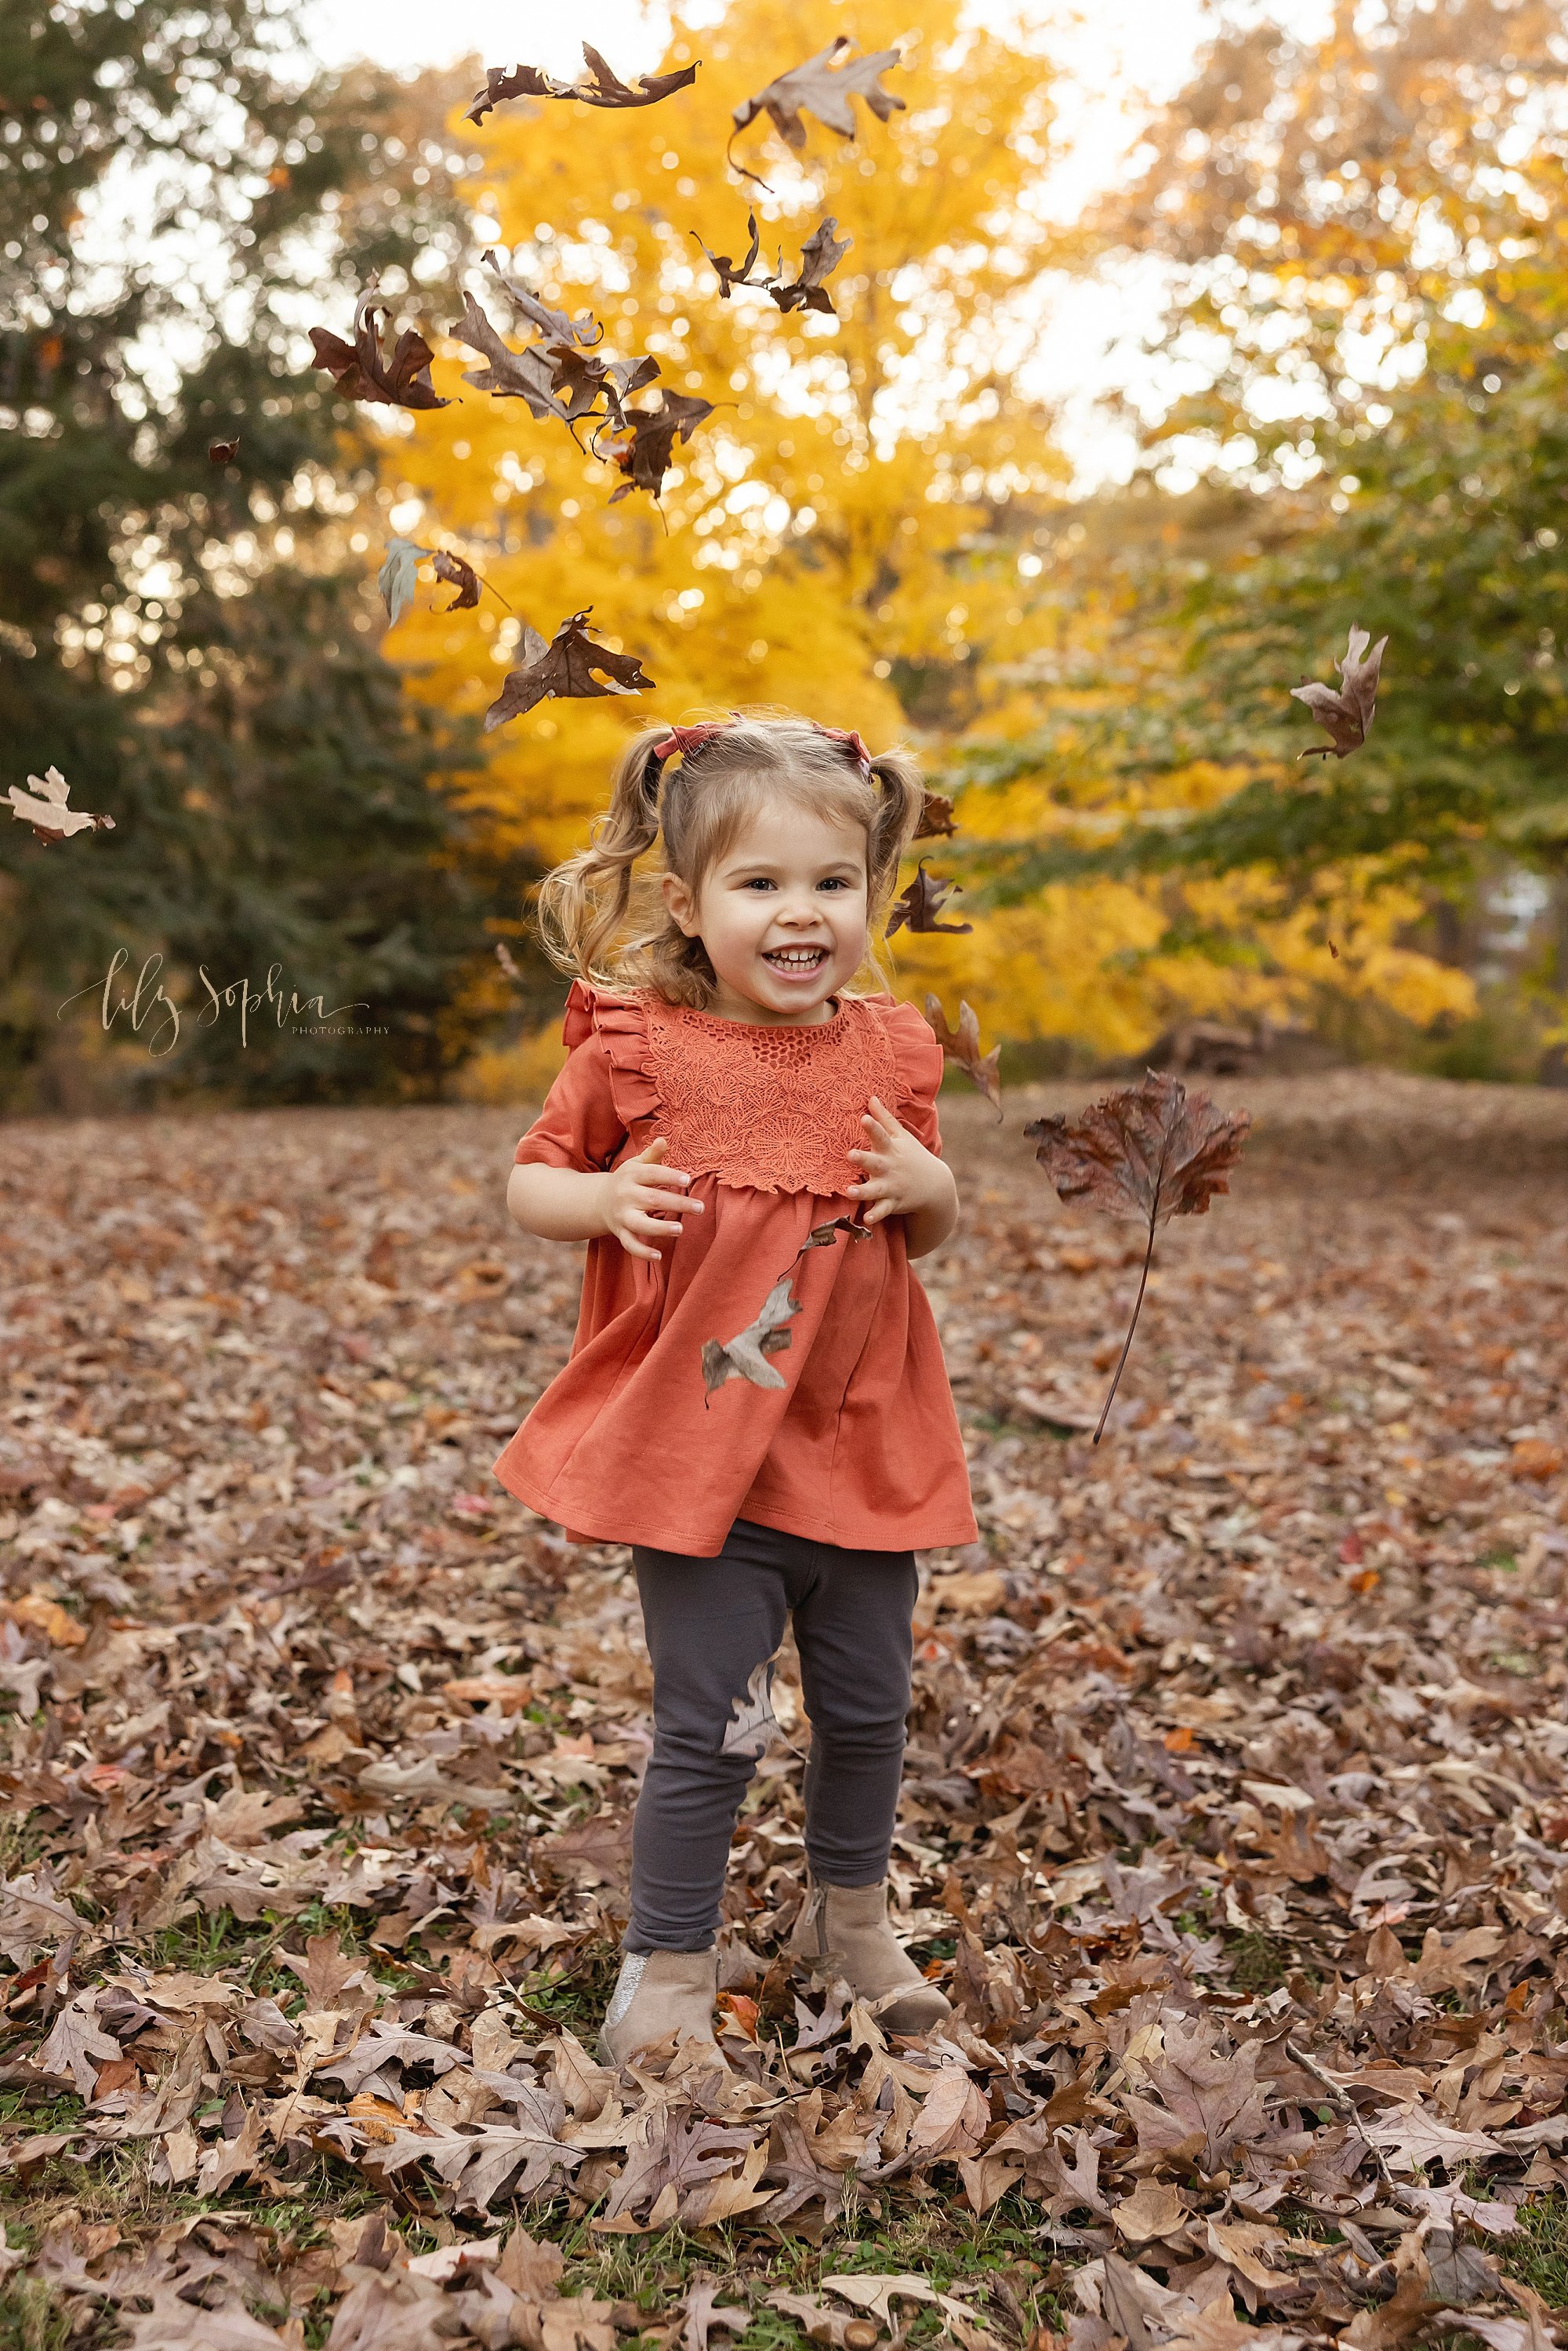  Family portrait of a little girl throwing leaves into the air in an Atlanta park during the fall season at sunset. 